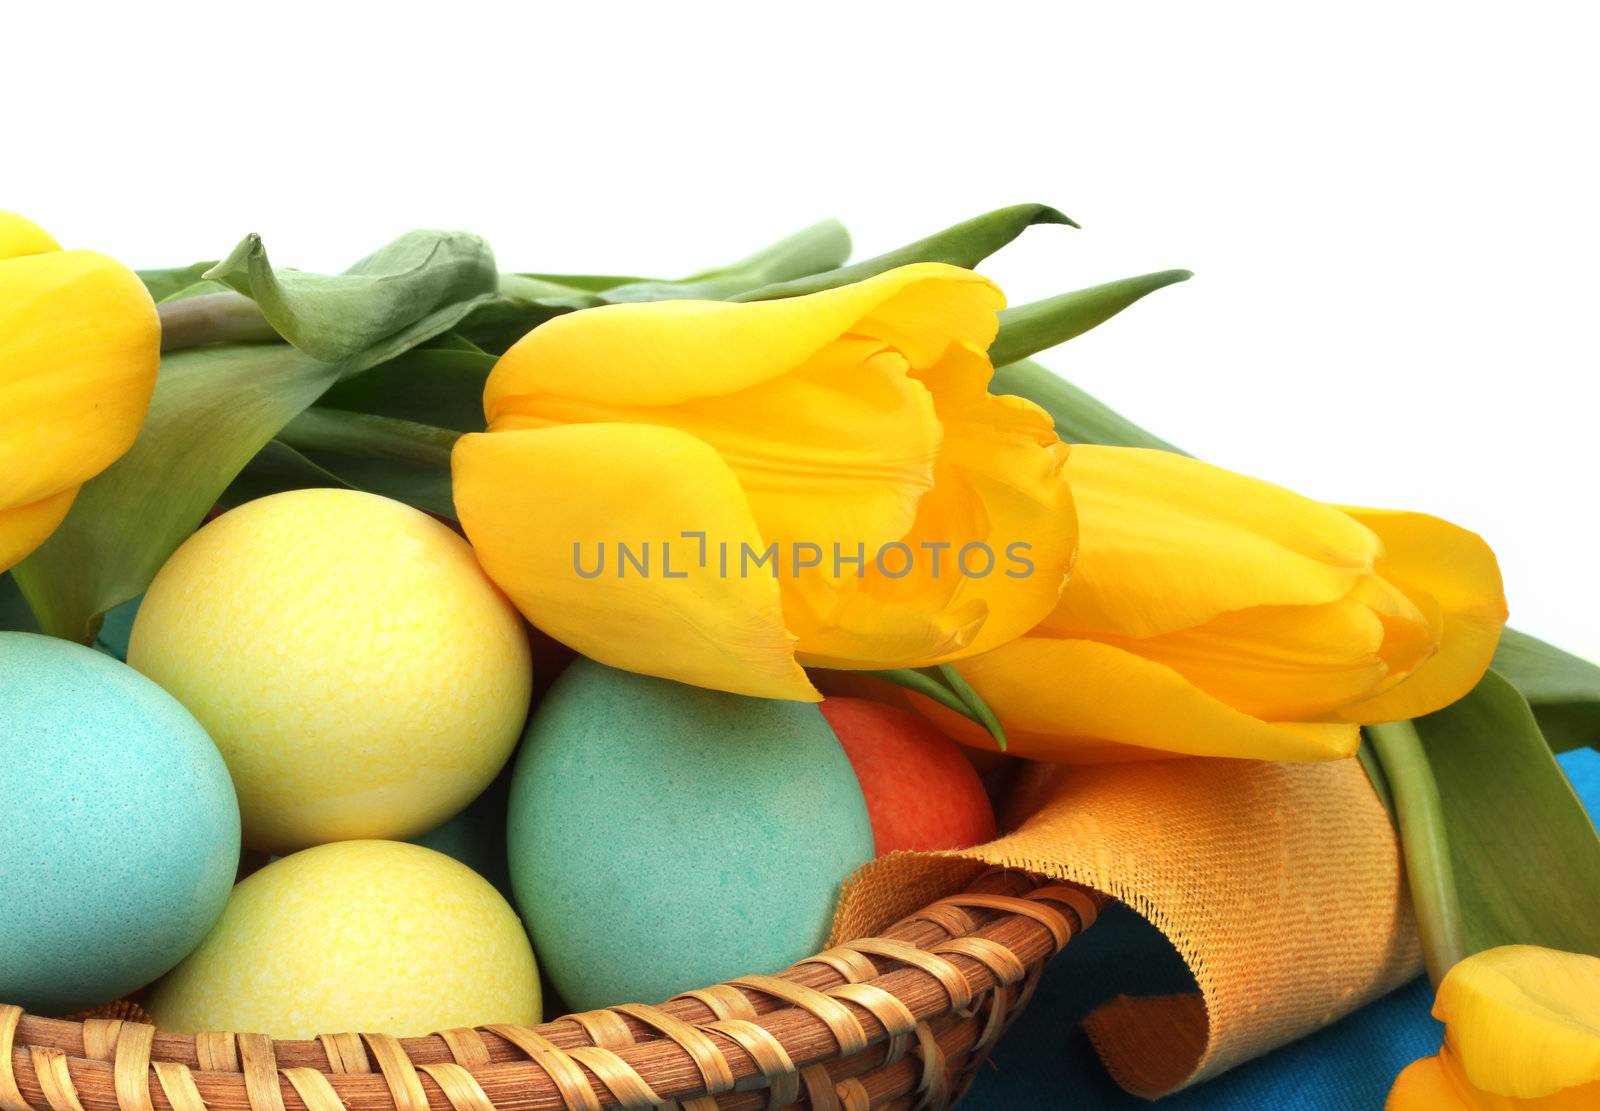 Easter eggs in basket with tulips by destillat